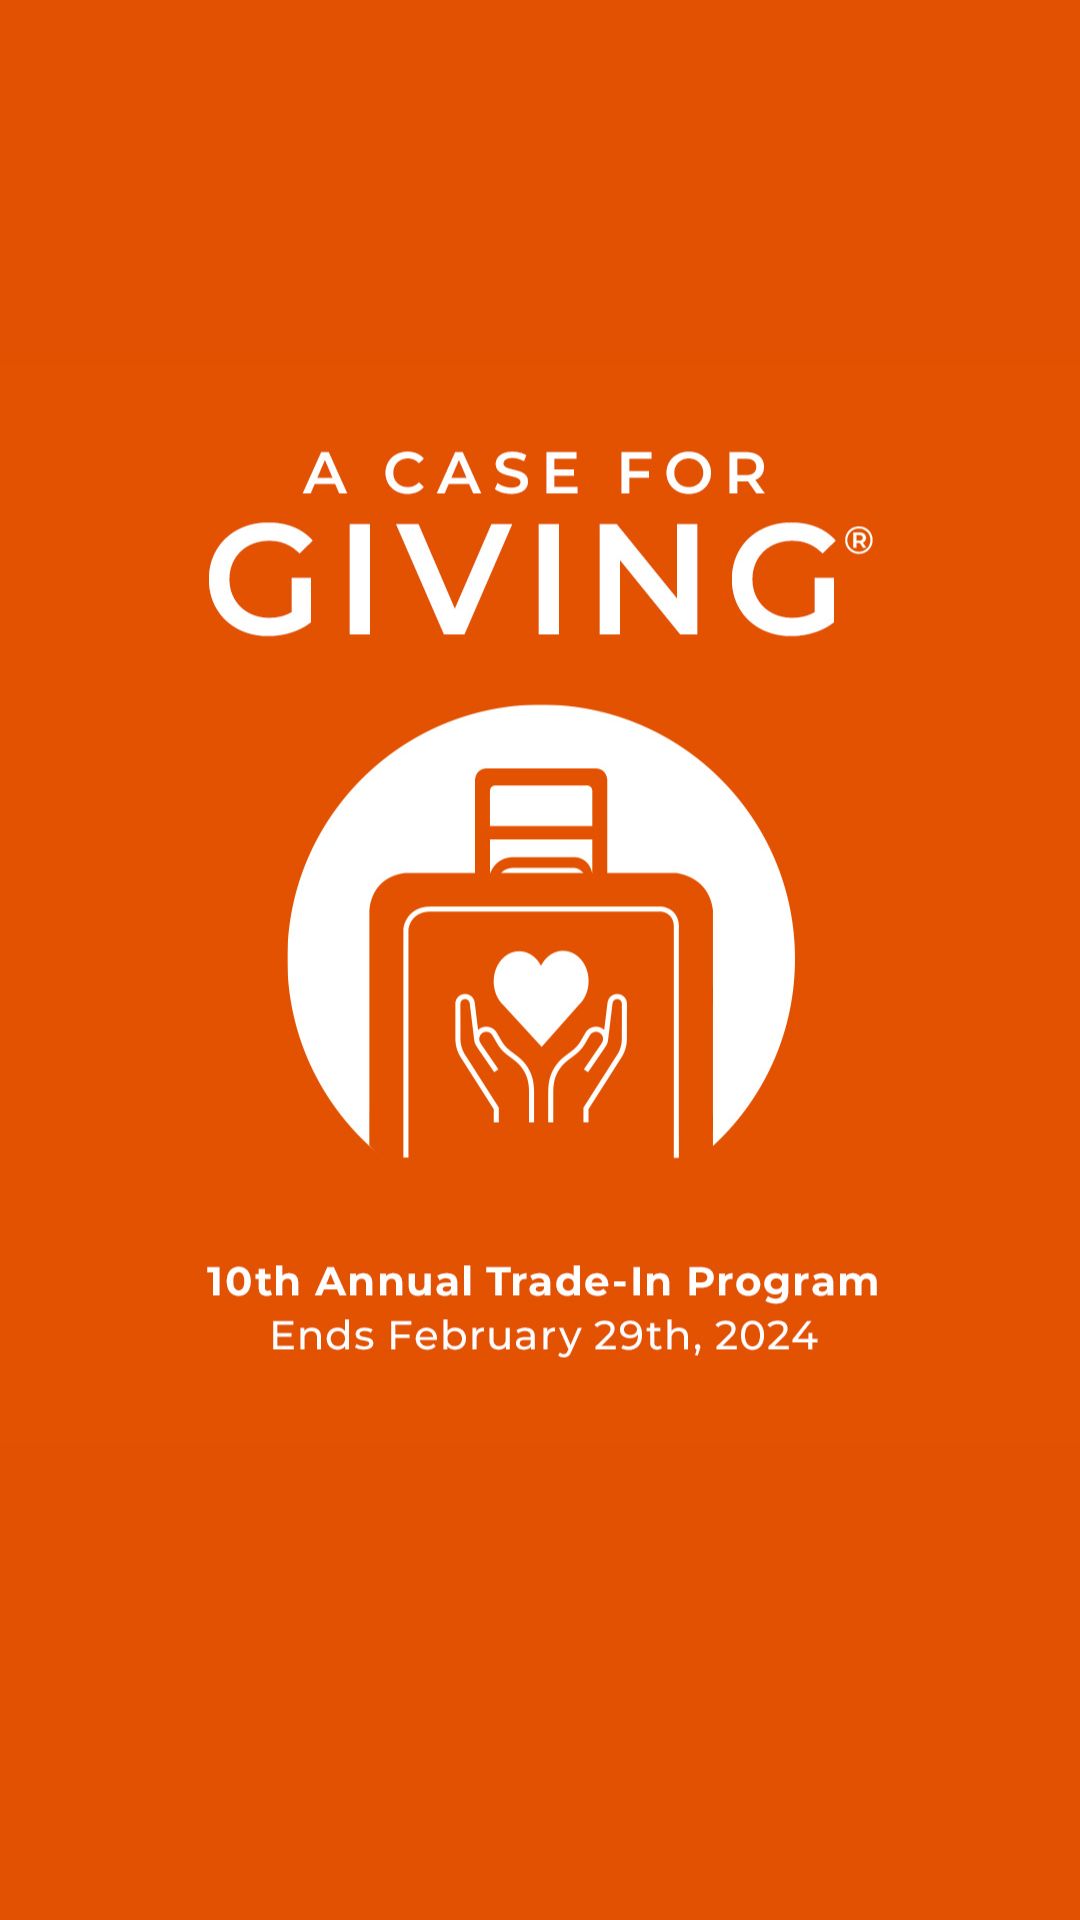 A Case for Giving | 10th Annual Trade-In Program | Ends February 29, 2024